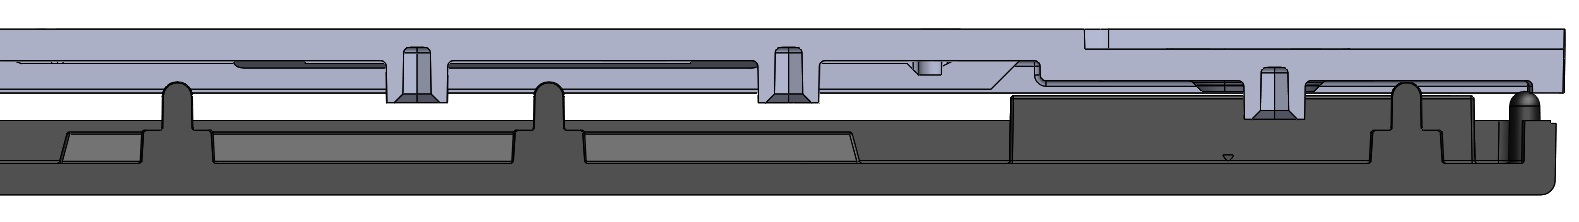 design for manufacturing misalignment